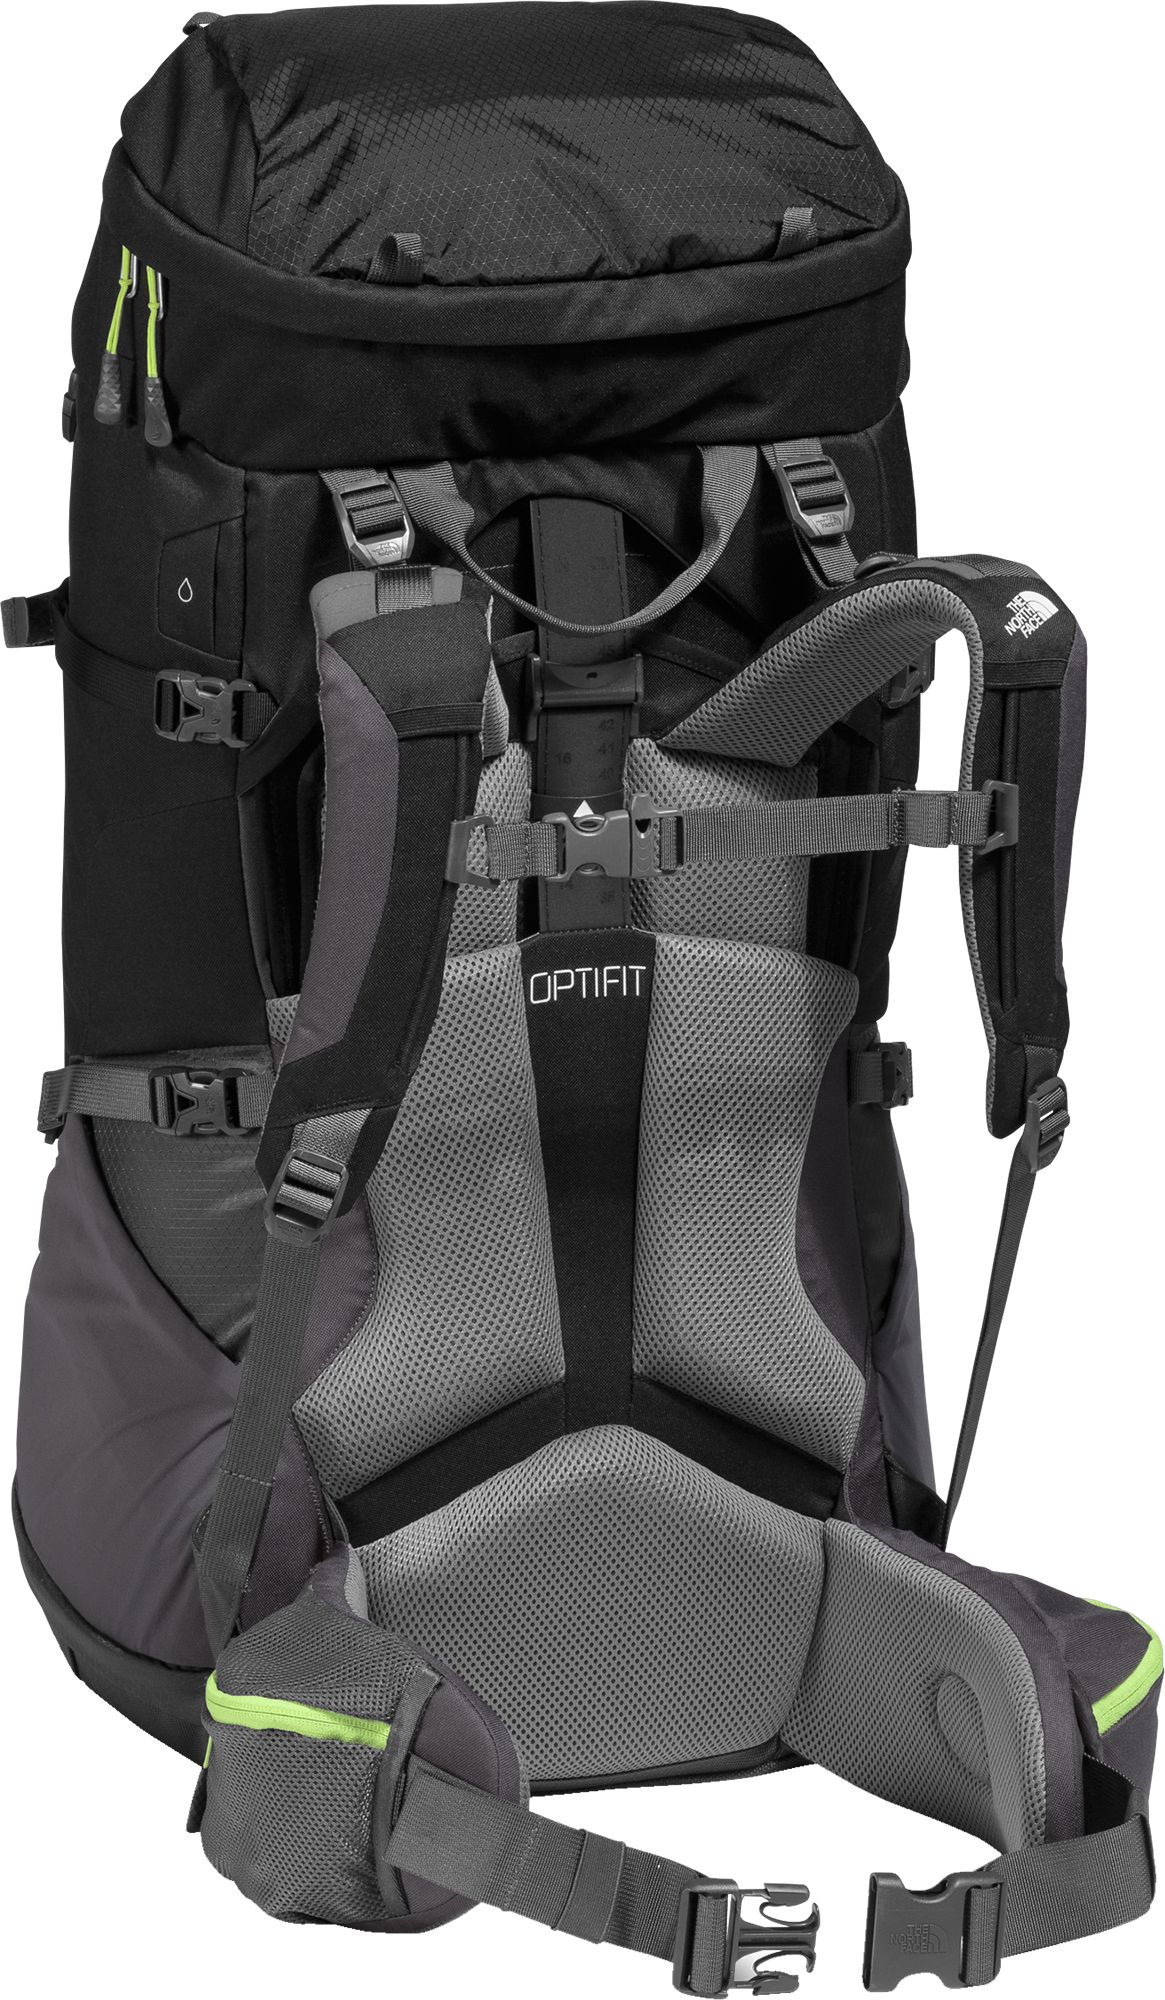 north face 60l backpack